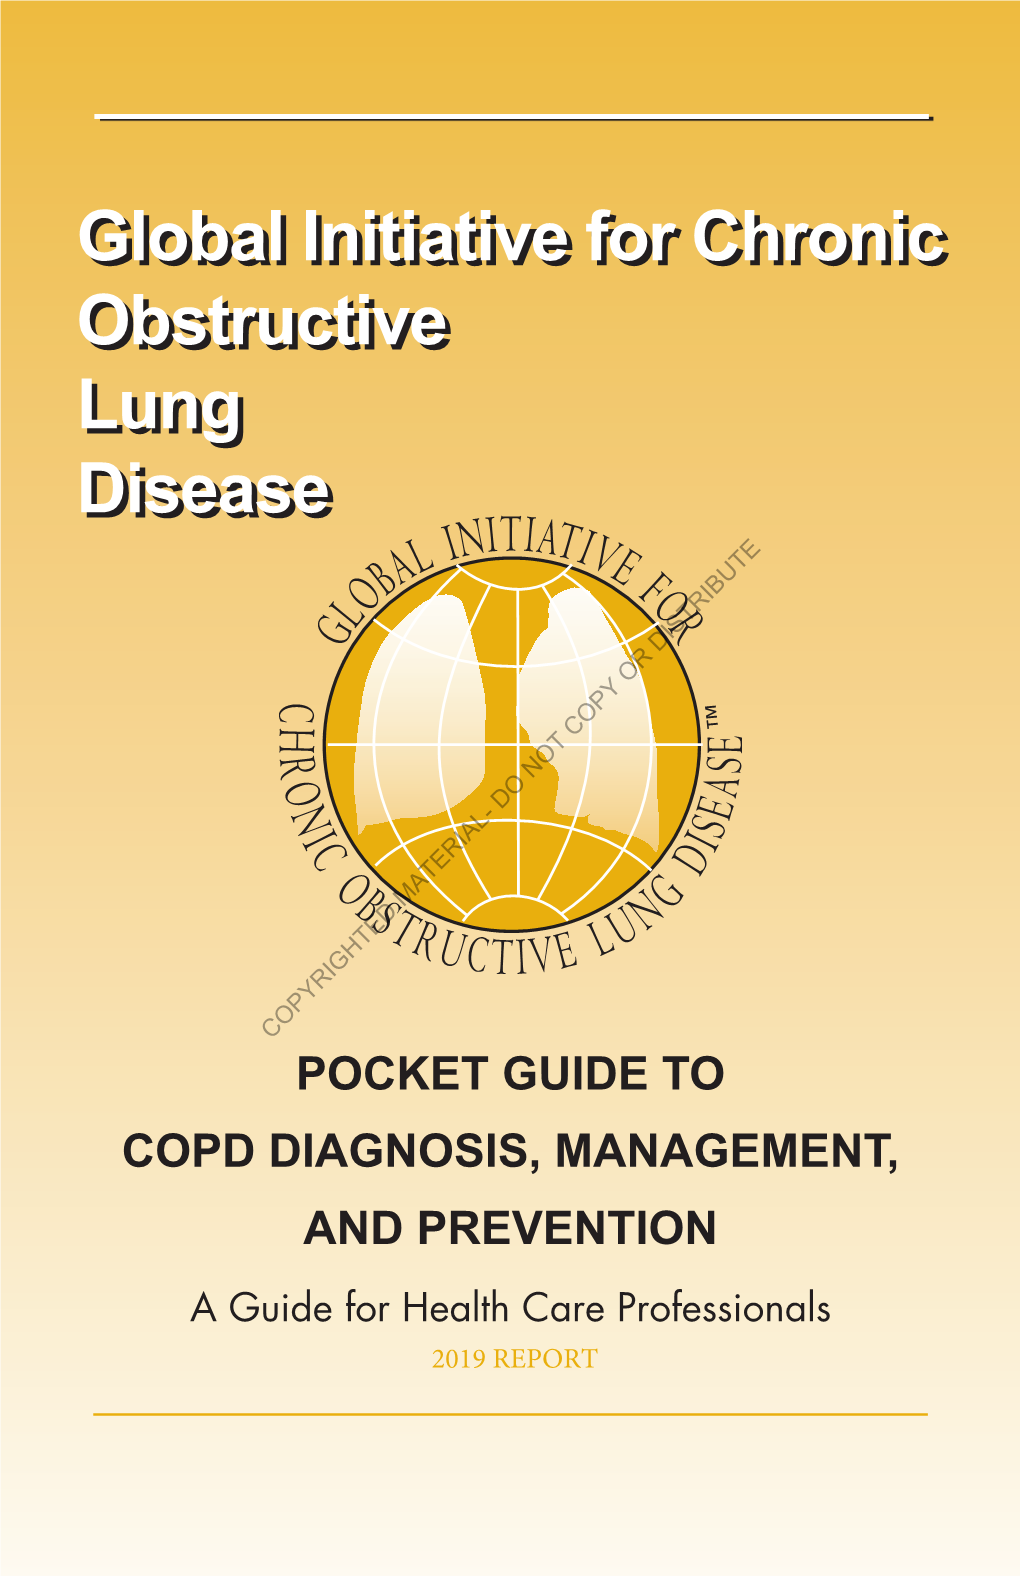 POCKET GUIDE to COPD DIAGNOSIS, MANAGEMENT, and PREVENTION a Guide for Health Care Professionals 2019 REPORT GLOBAL INITIATIVE for CHRONIC OBSTRUCTIVE LUNG DISEASE